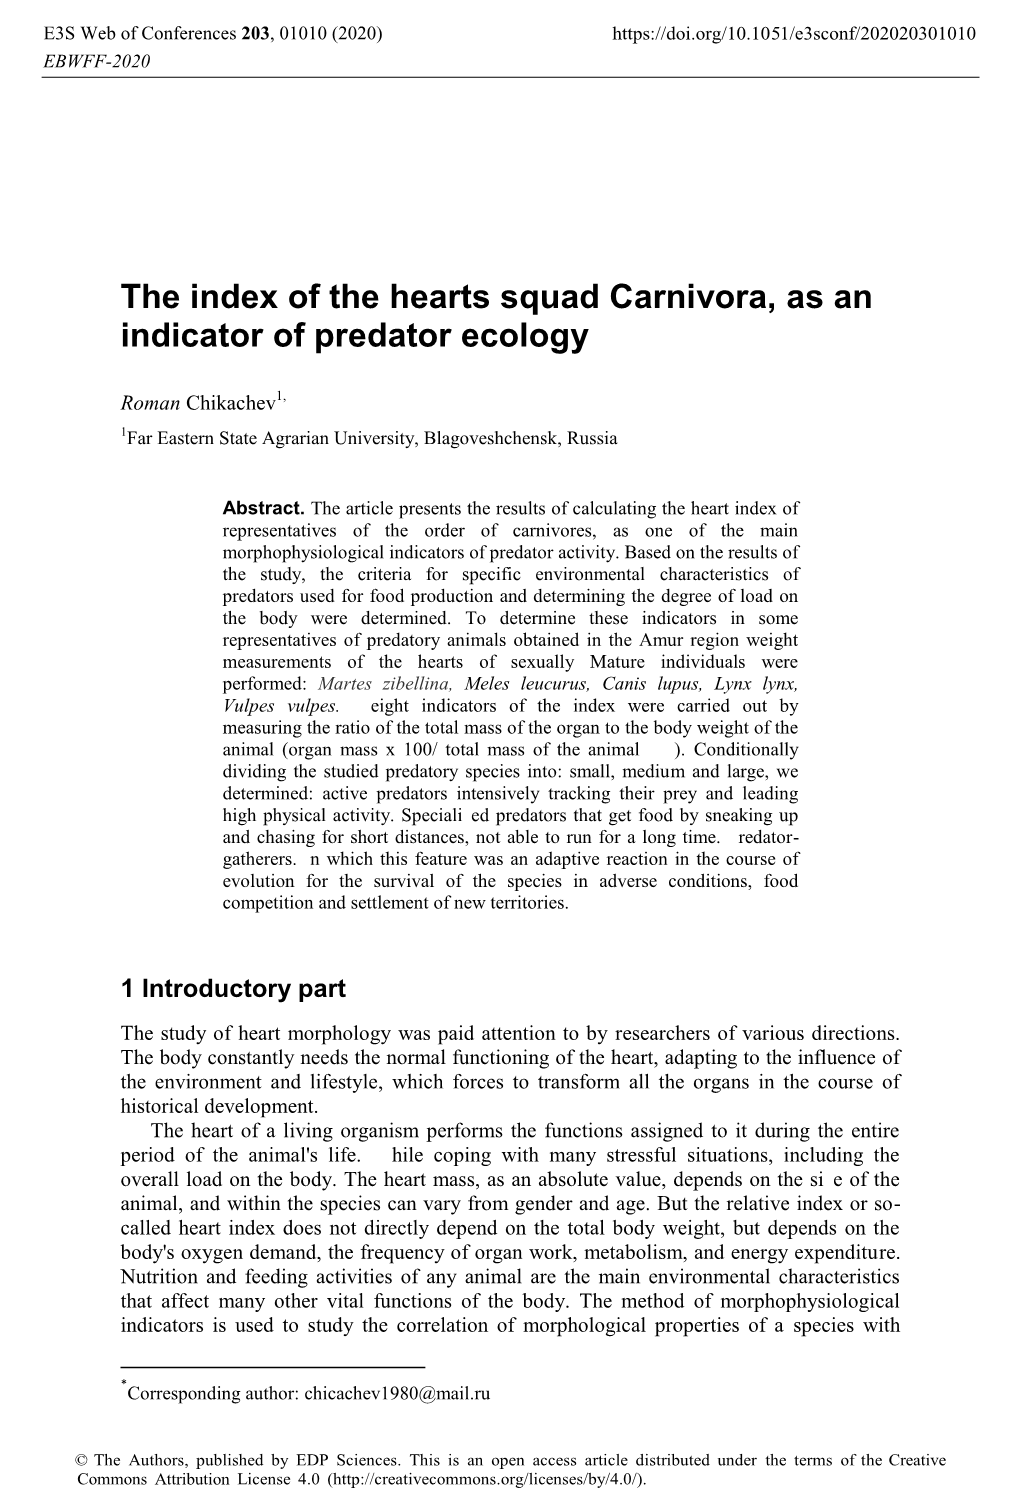 The Index of the Hearts Squad Carnivora, As an Indicator of Predator Ecology